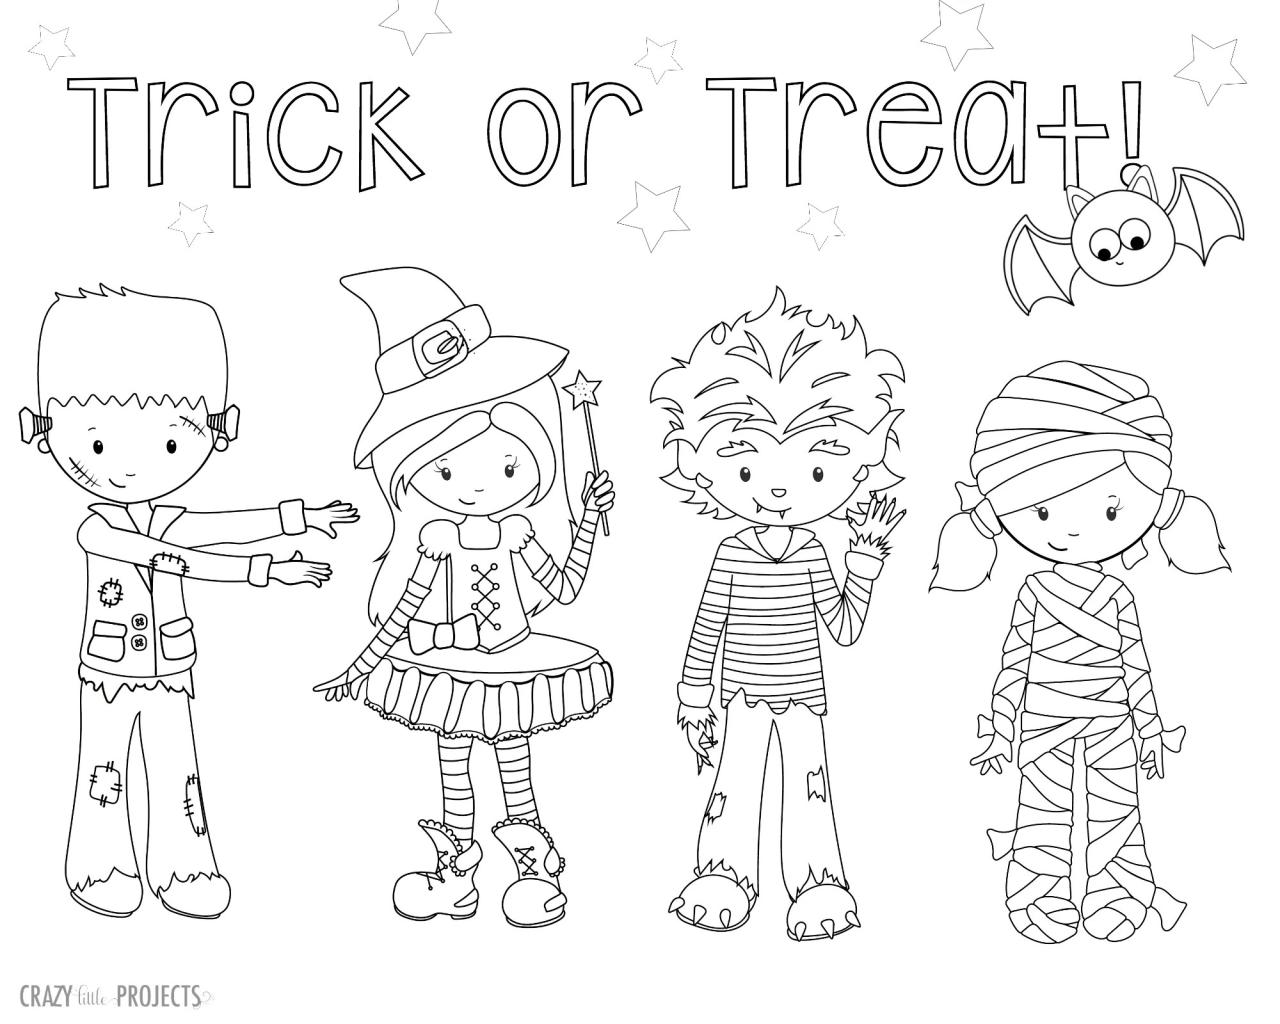 Trick or Treat Coloring Page Crazy Little Projects